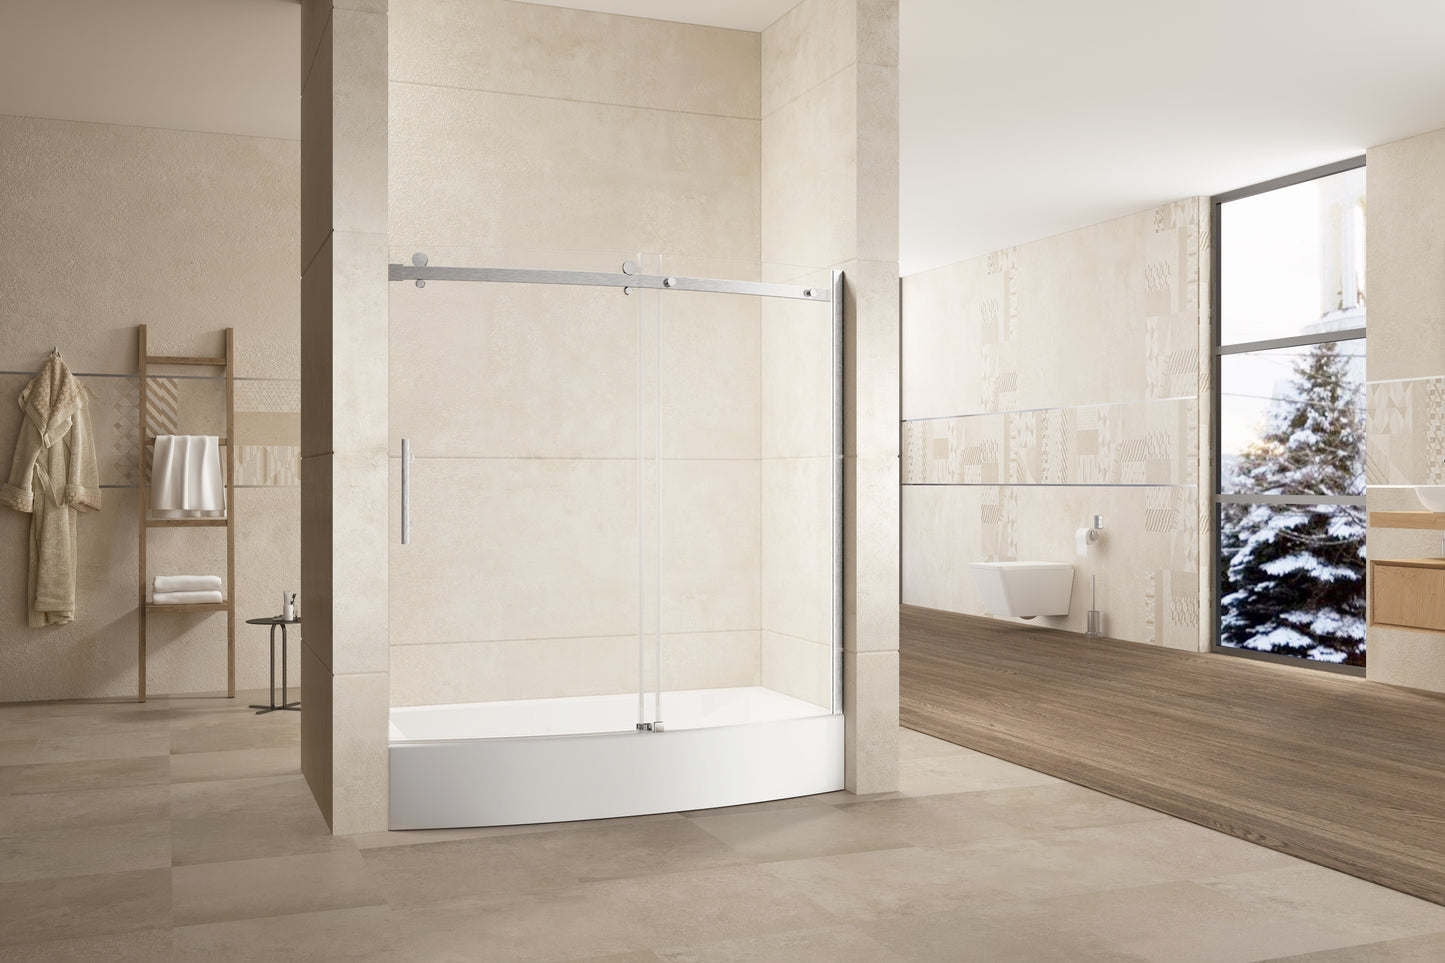 TRUSTMADE Frameless Curved Bathtub Shower Doors 60" Width x 58" Height with 1/3"(8mm) Clear Tempered Glass Finish, K07N-1